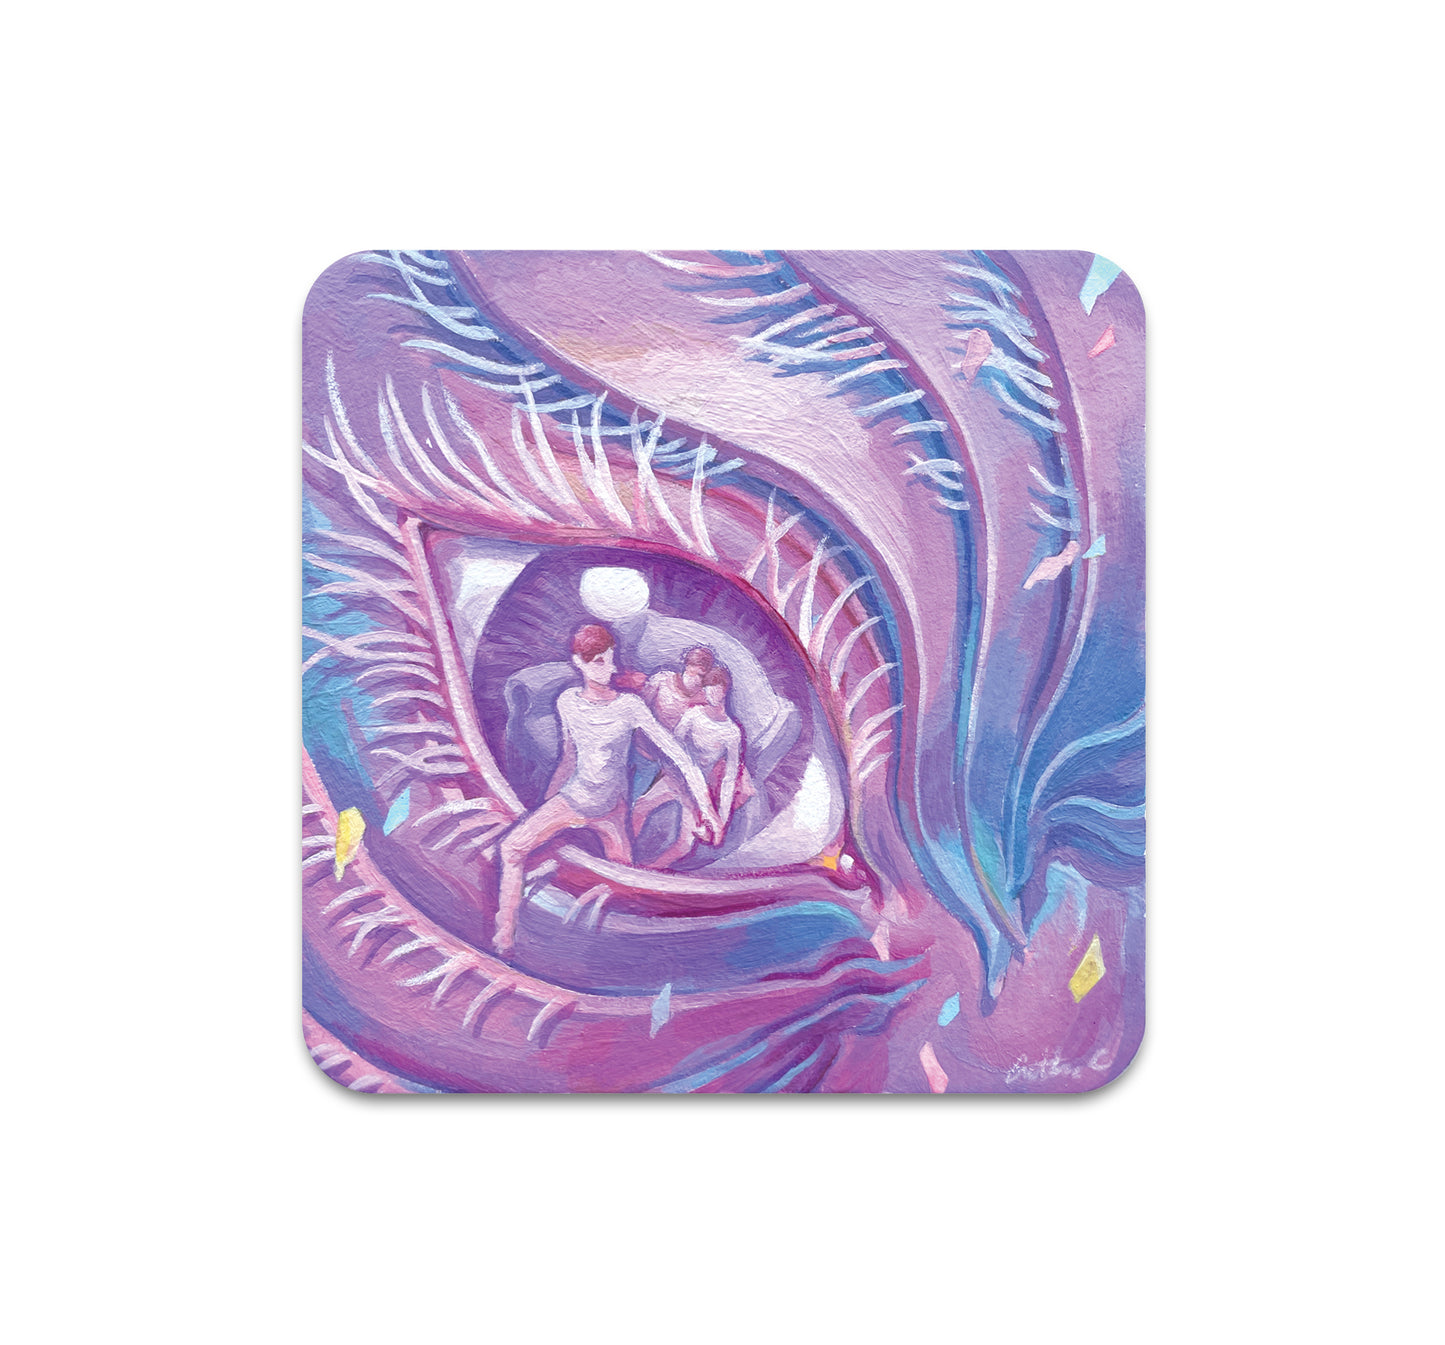 S7 Authan Chen - Coaster 2